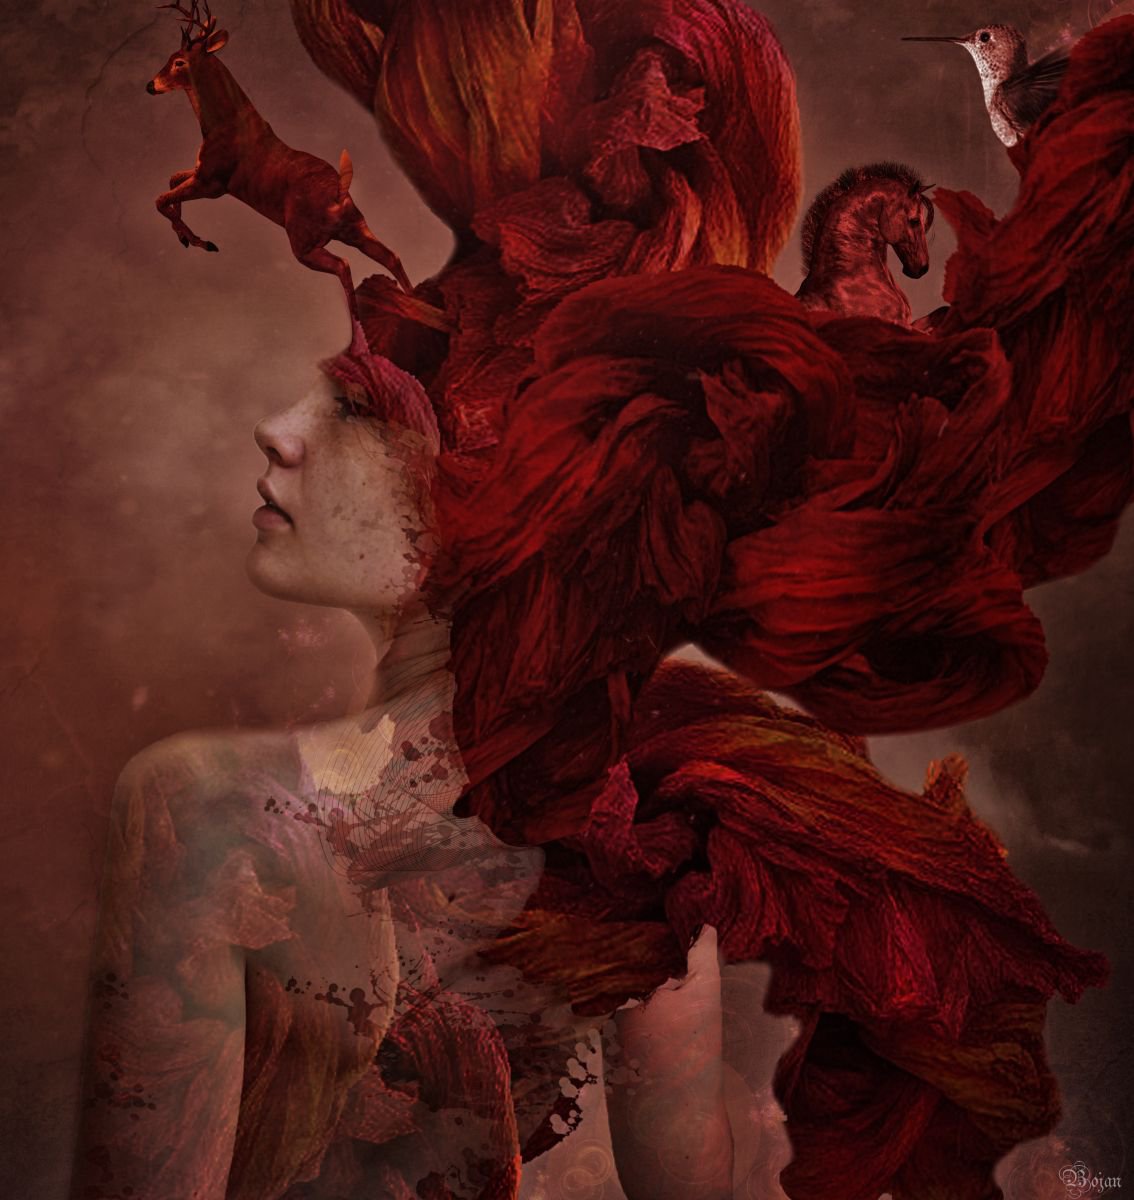 POWER OF YOUR HAIR by Bojan Jevtic